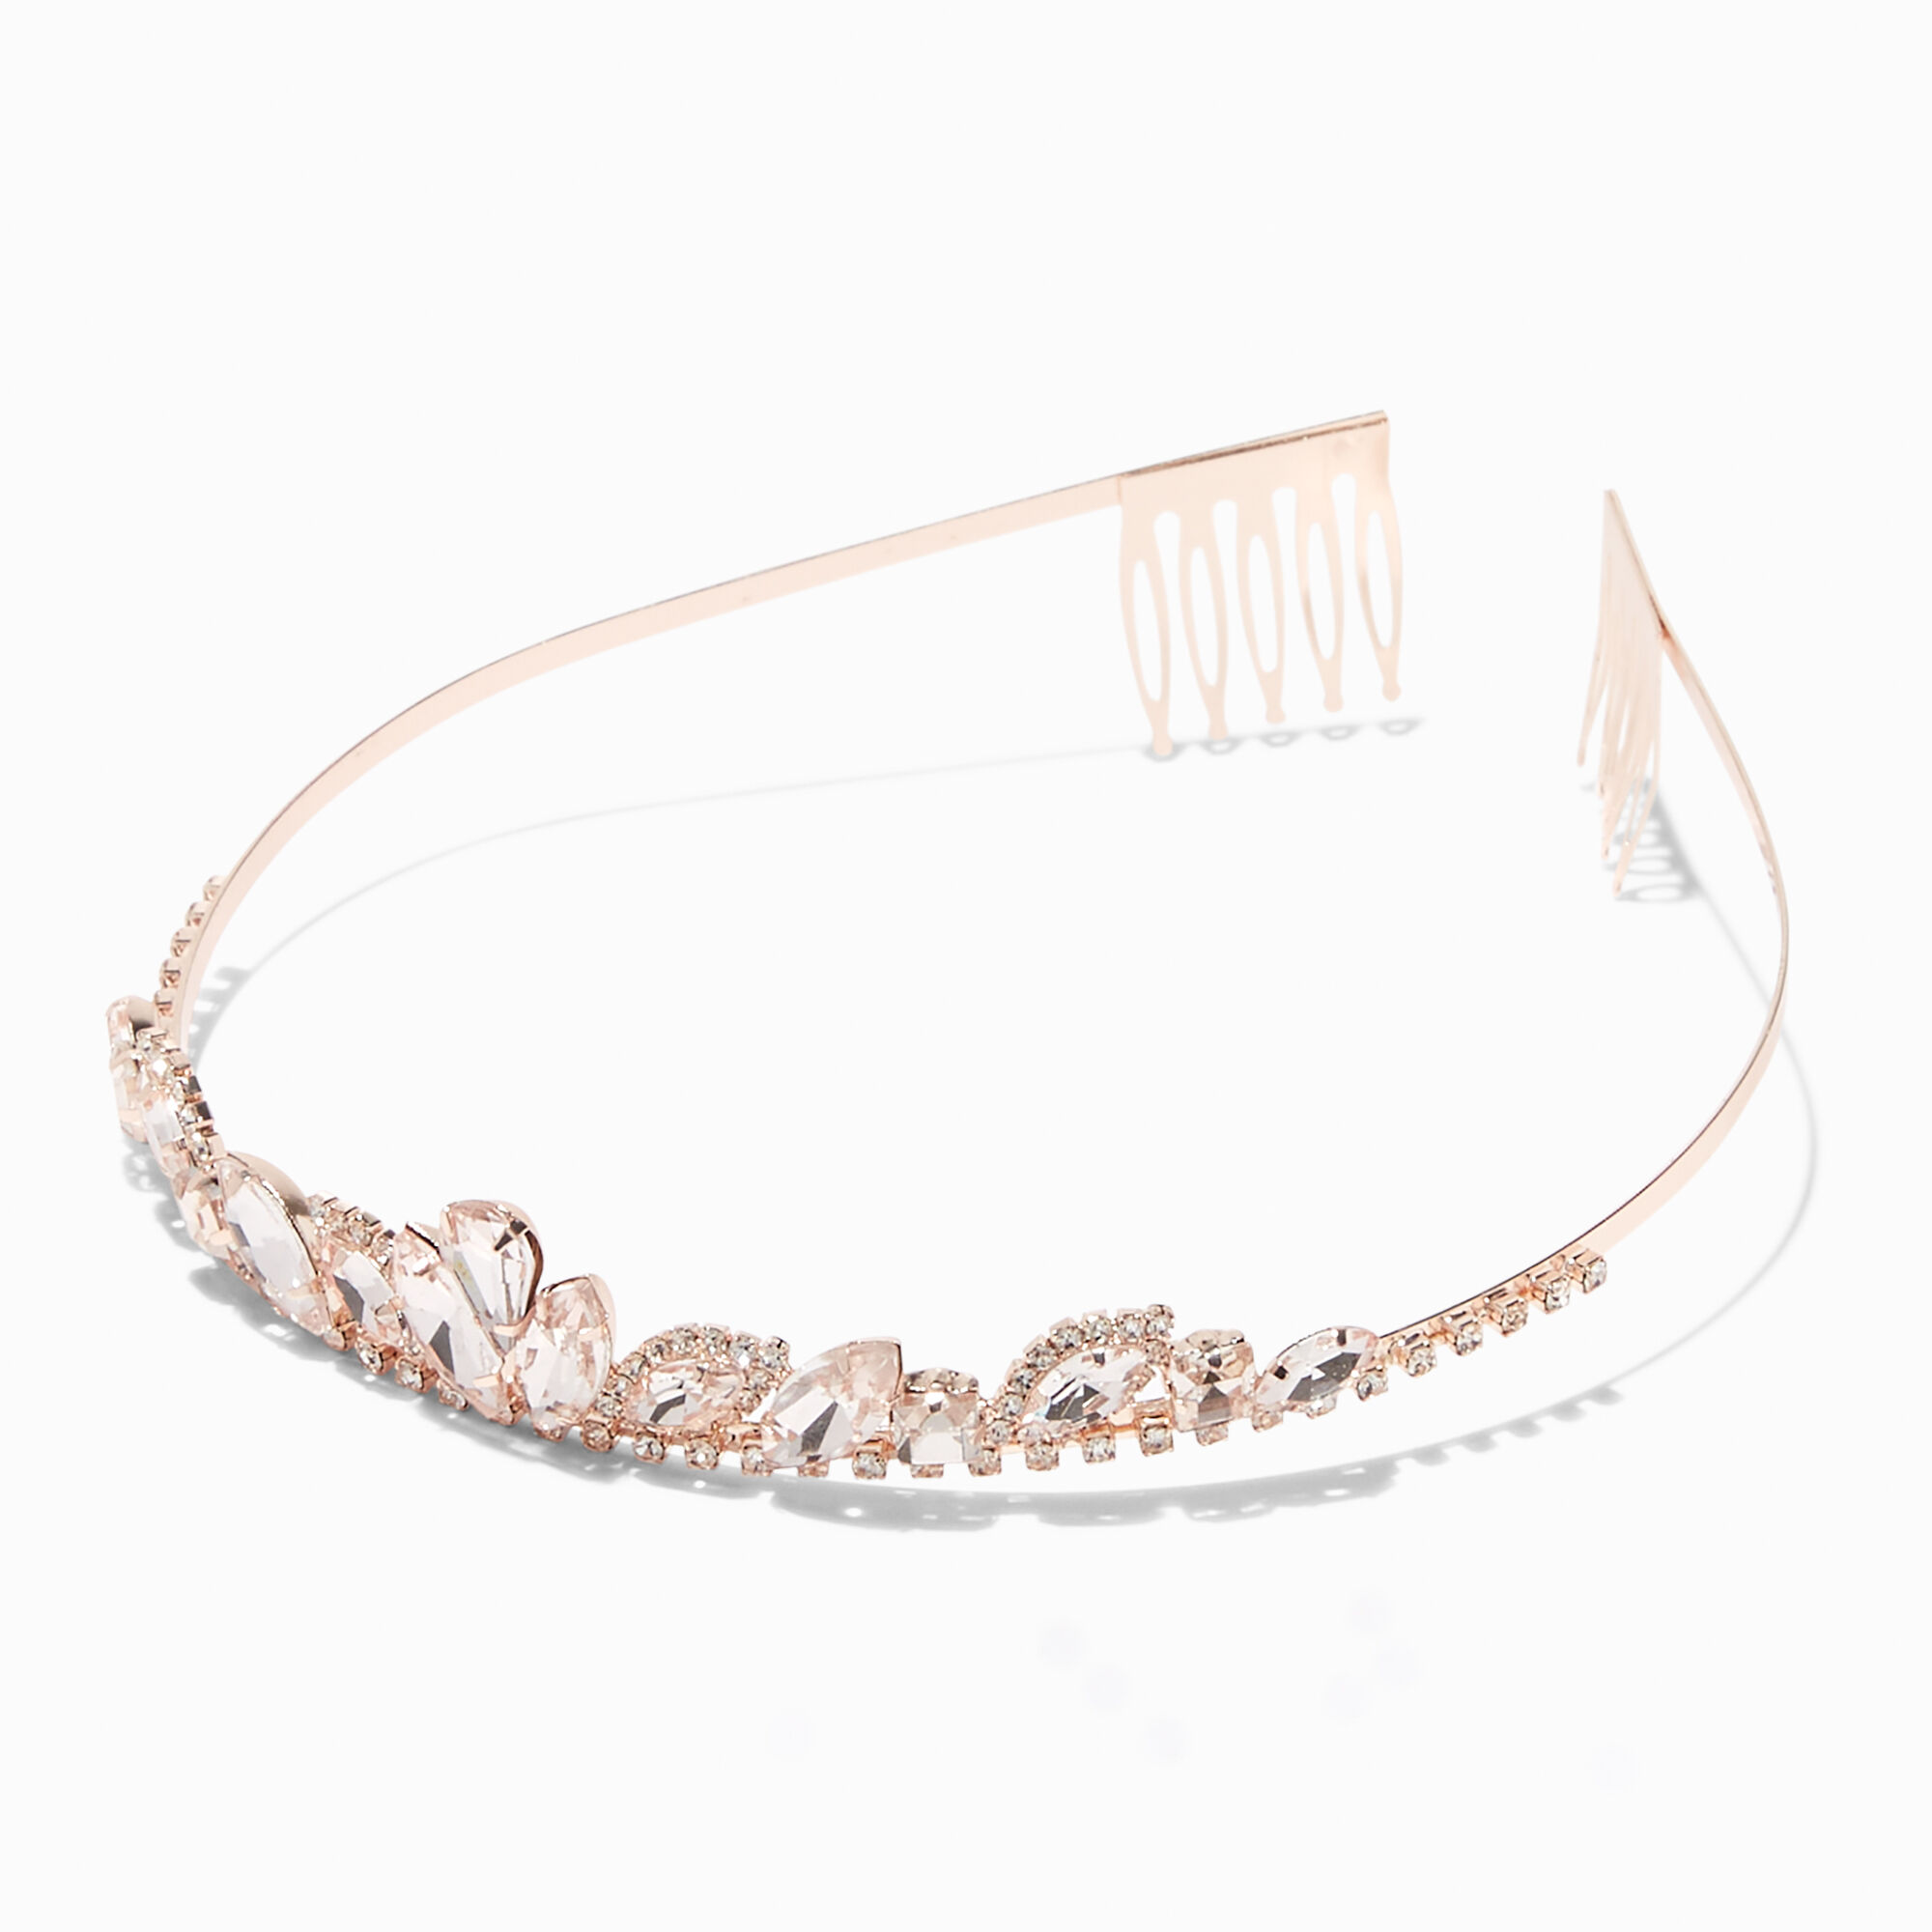 View Claires Tone Enchantment Tiara Rose Gold information